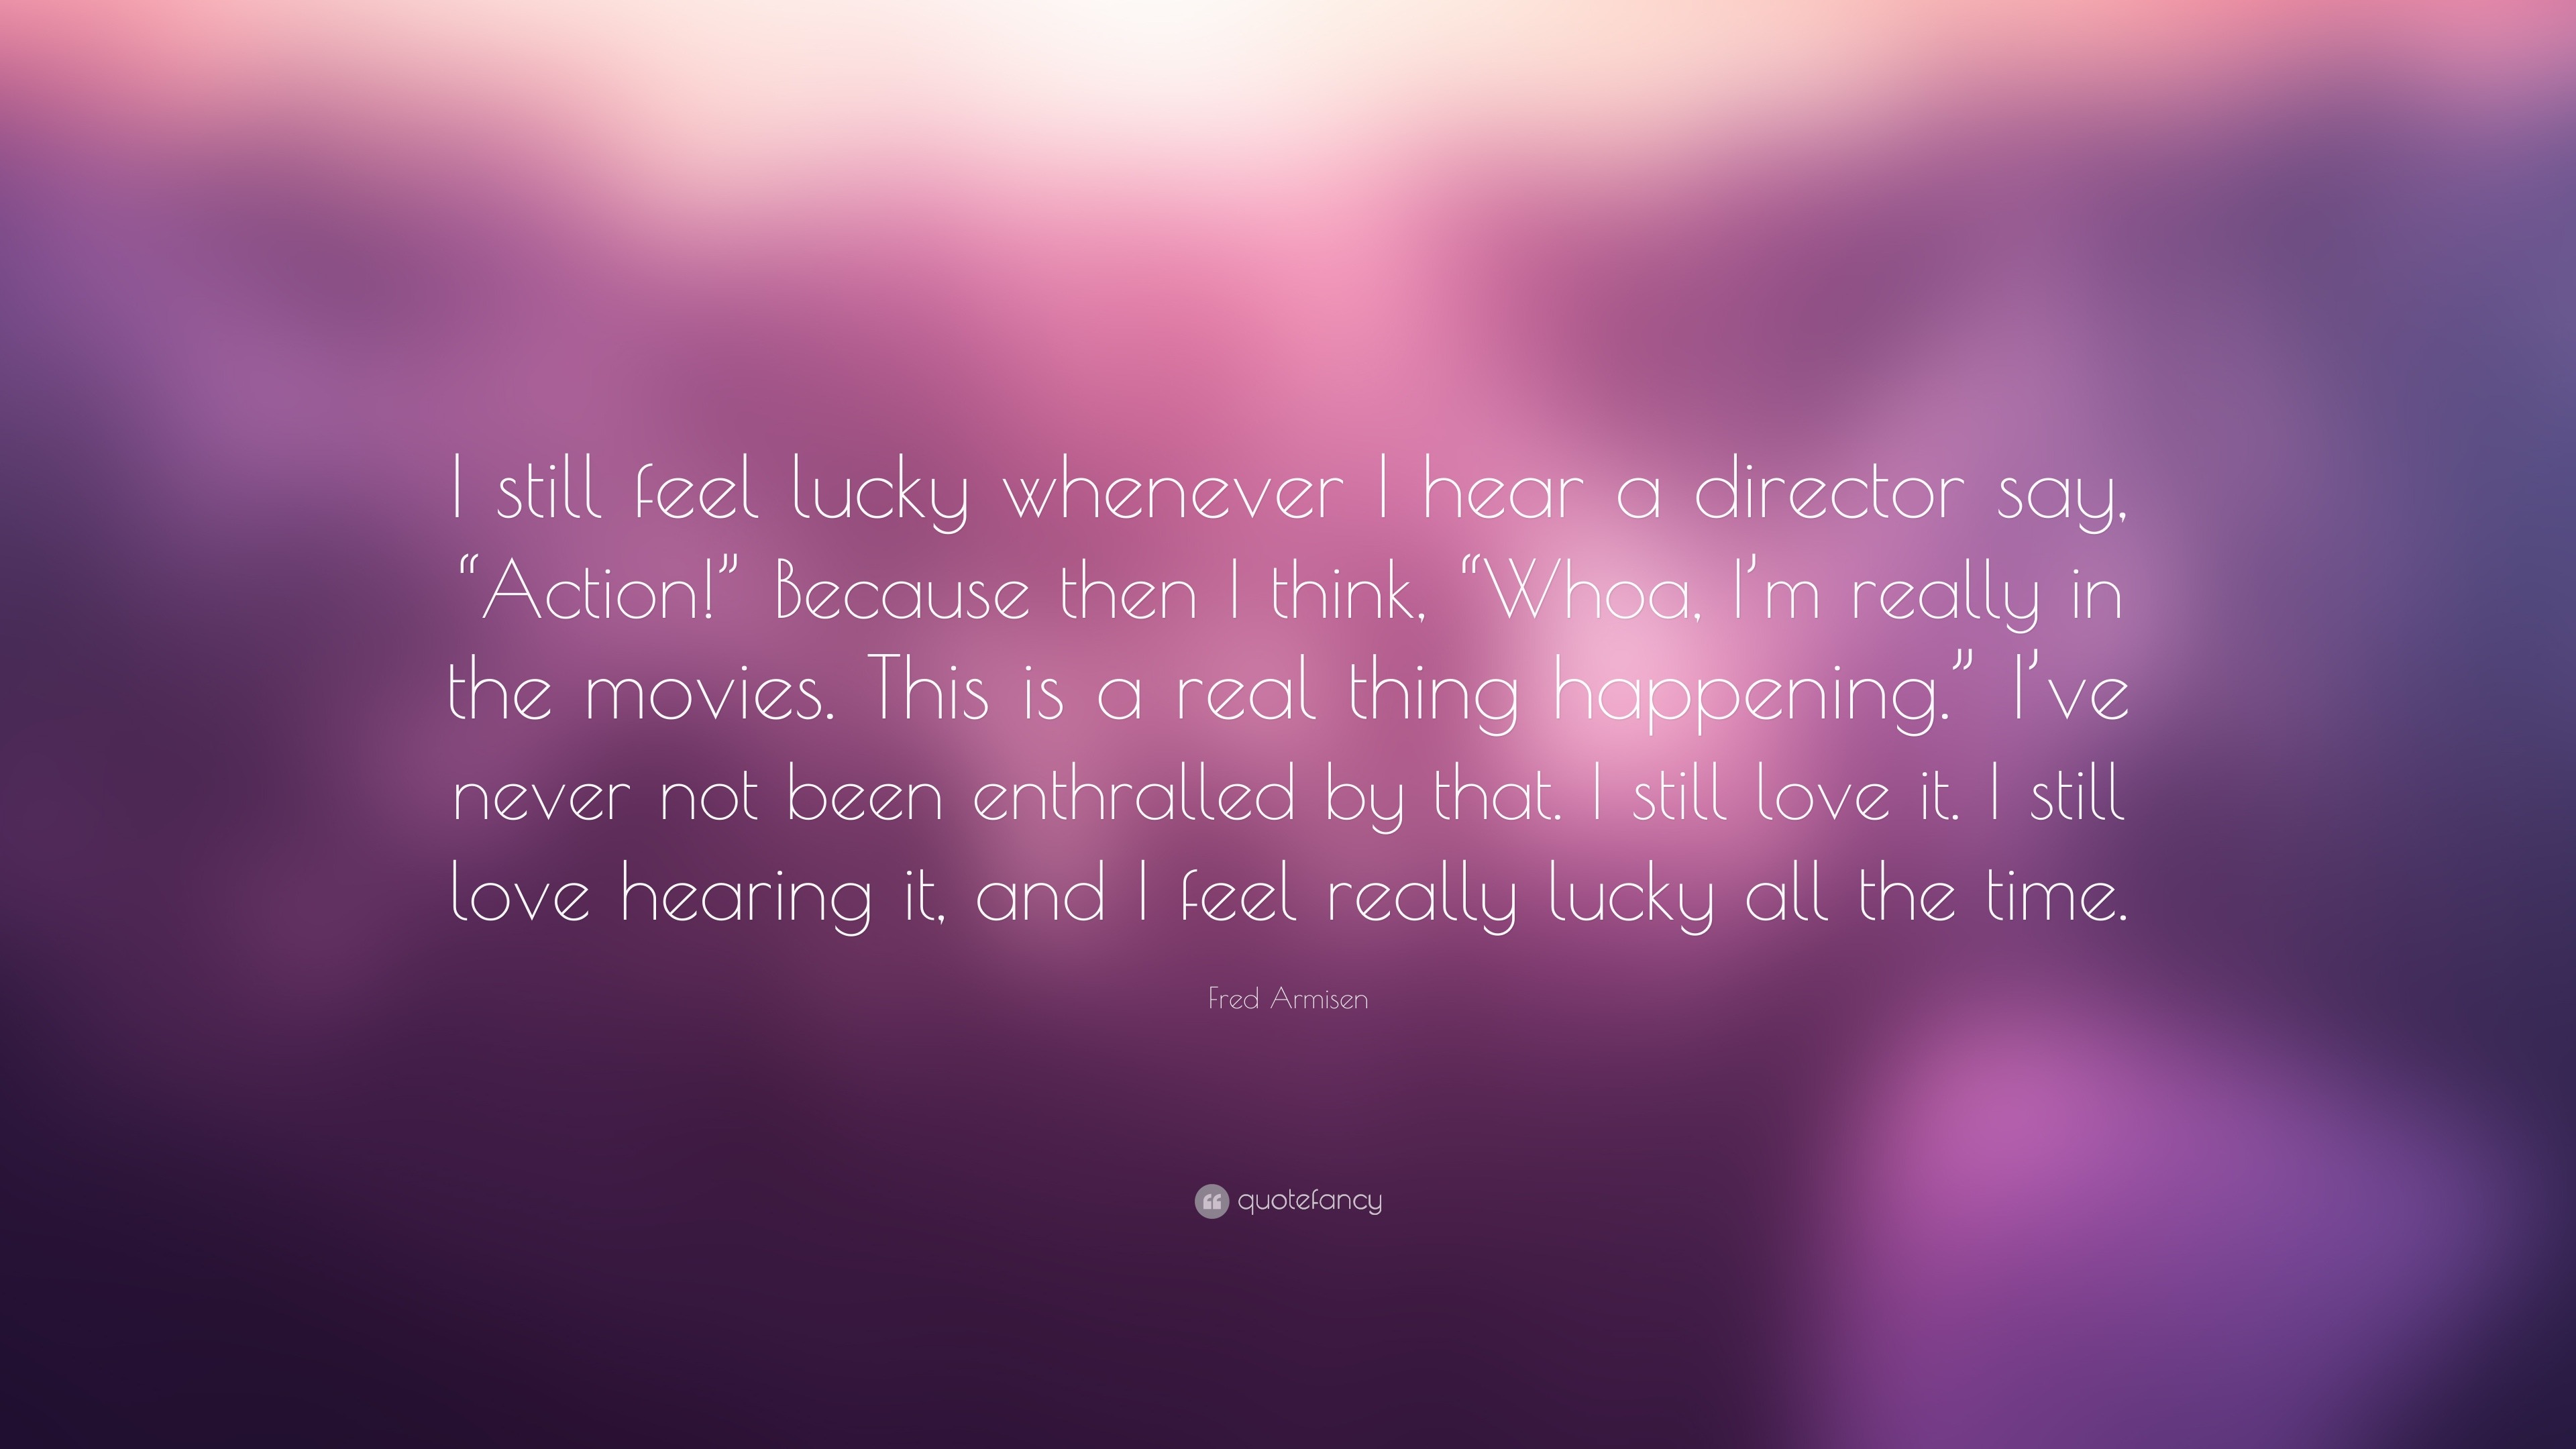 Fred Armisen Quote: “I still feel lucky whenever I hear a director say ...